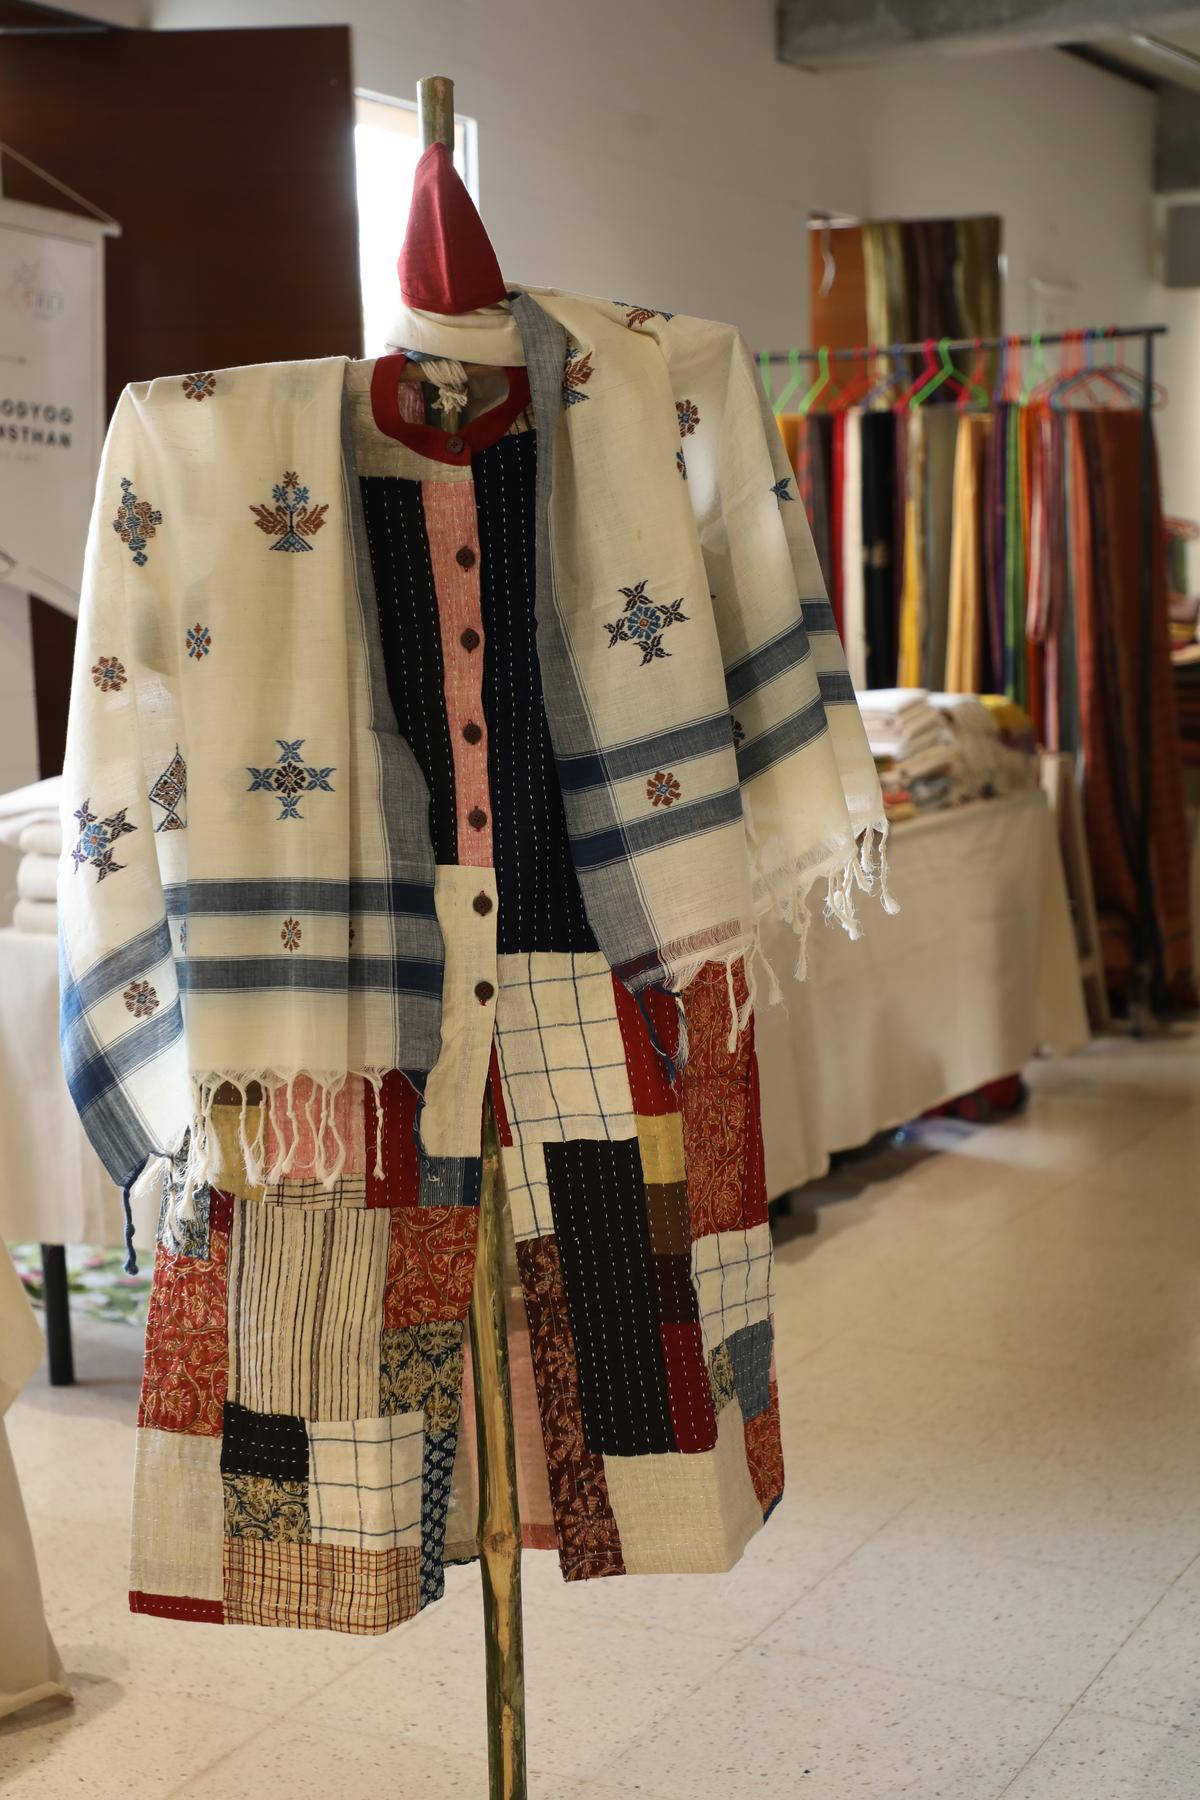 Handspun, handwoven textiles and garments will be on showcase